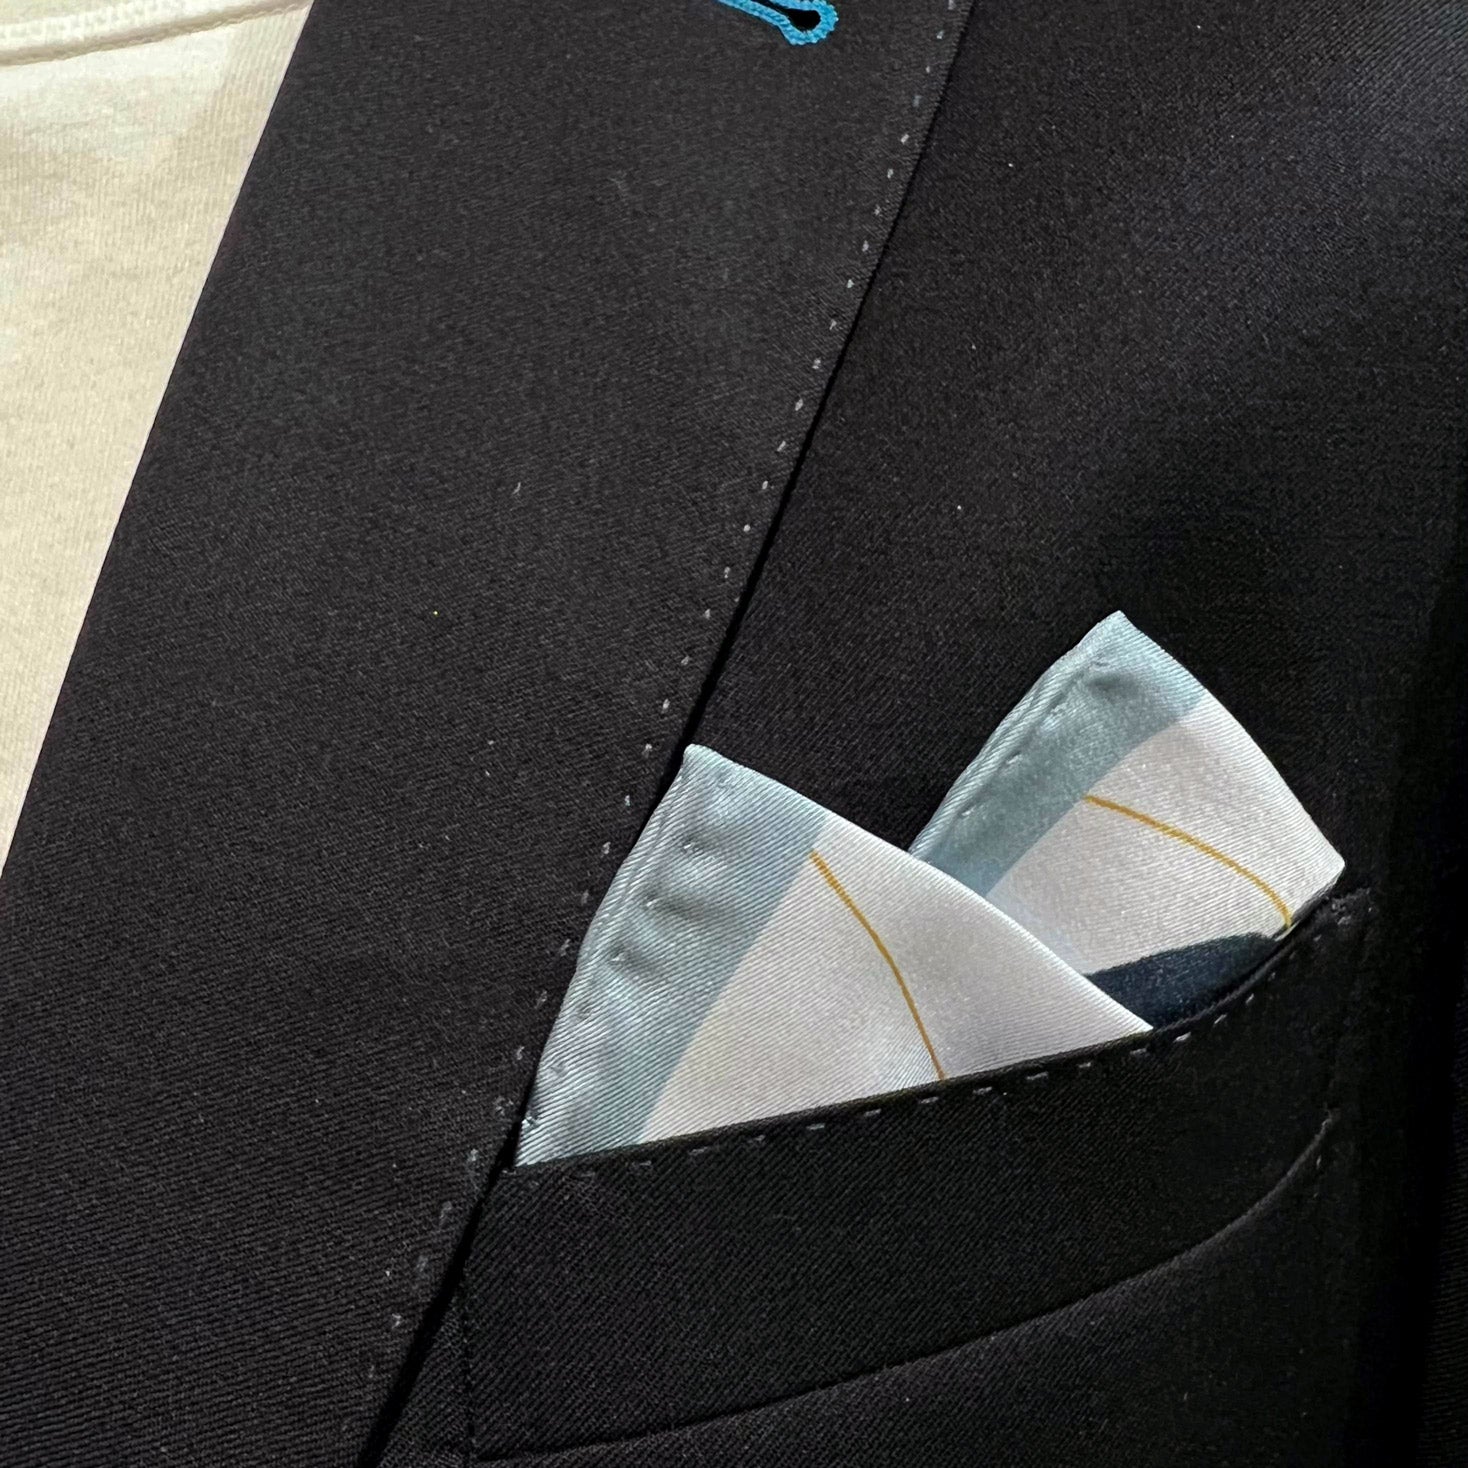 Silk square handkerchief with blue leaf pattern and placed in a jacket breast pocket.